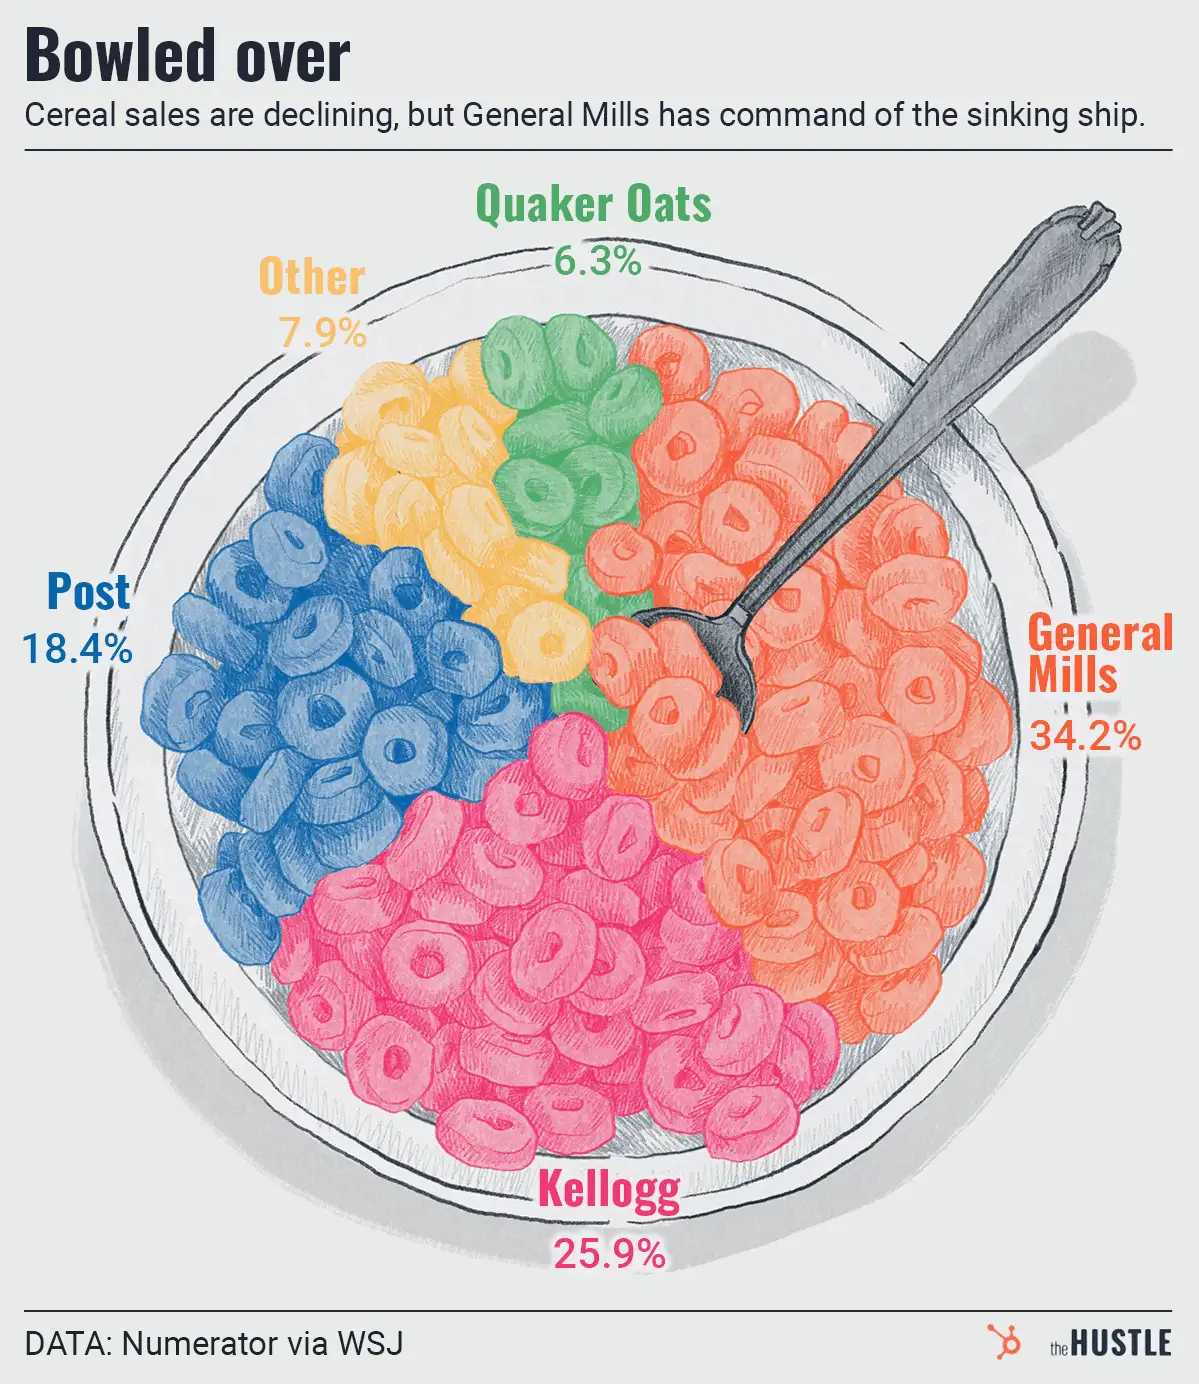 The cereal industry’s forecast has no added sugar